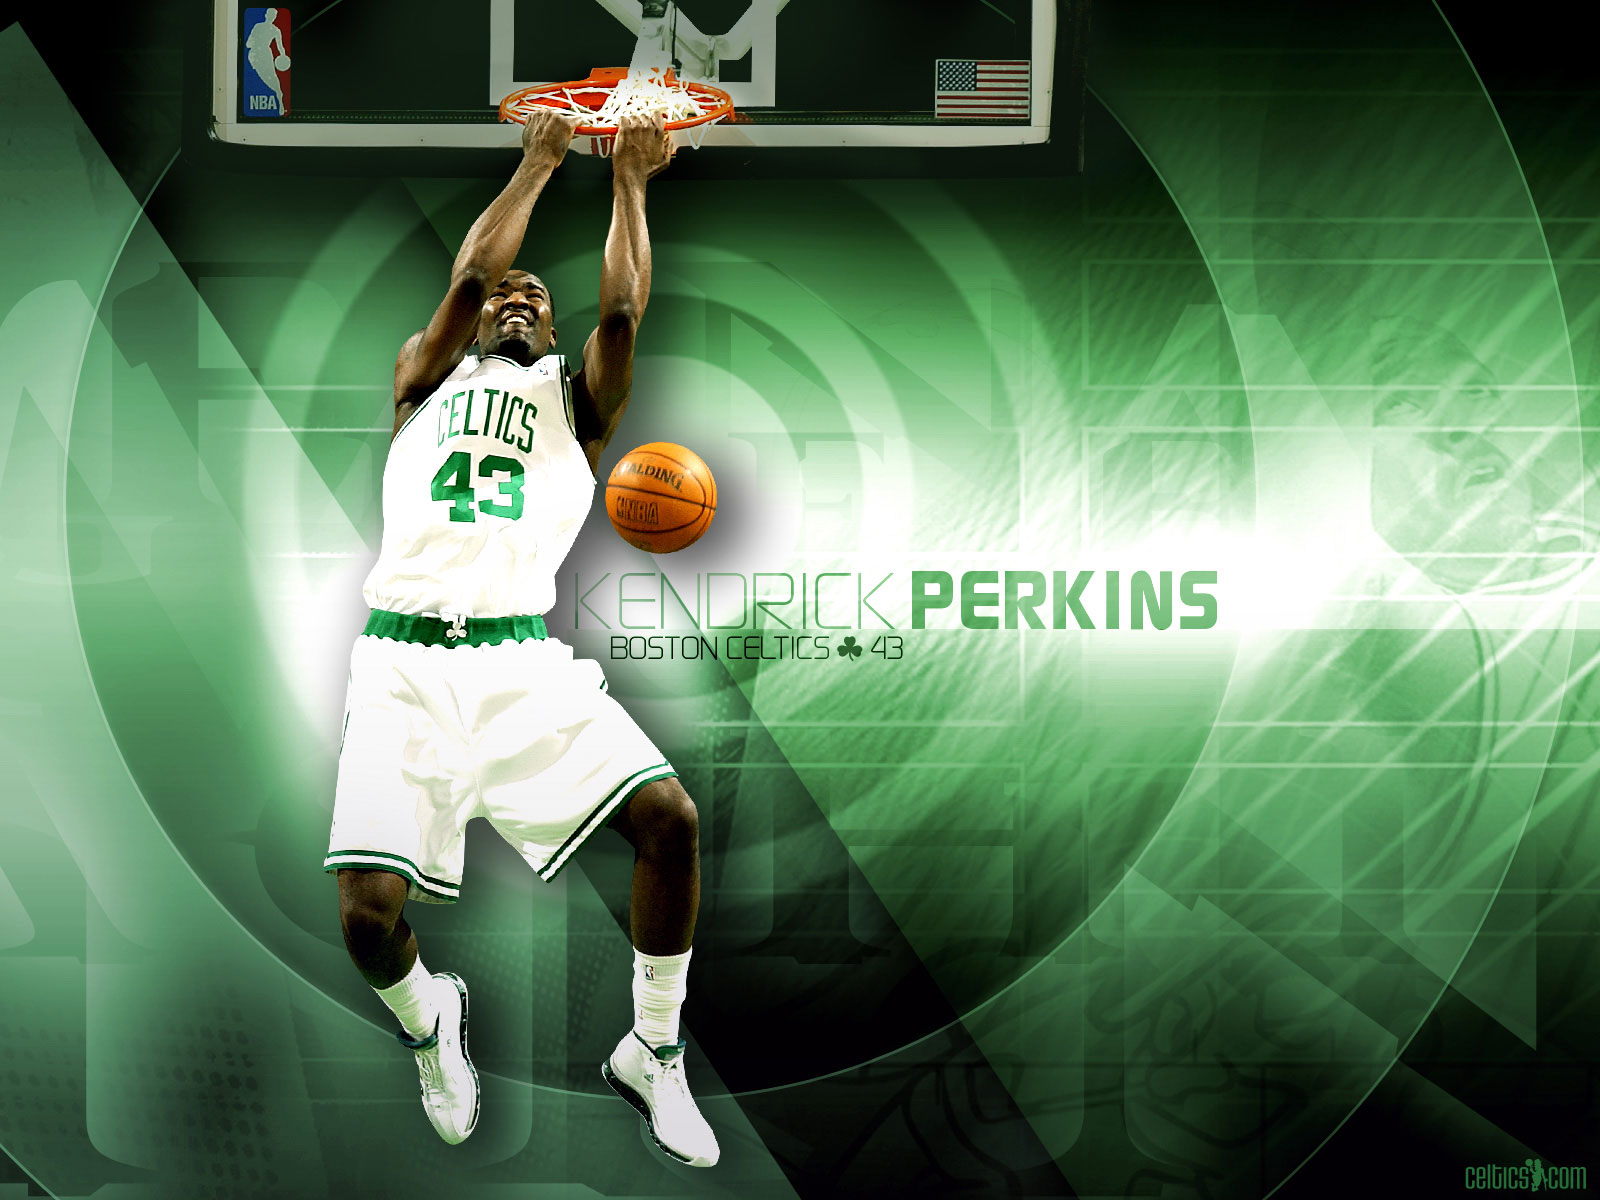  to add in last week or so this wallpaper was made by Celtics.com, 